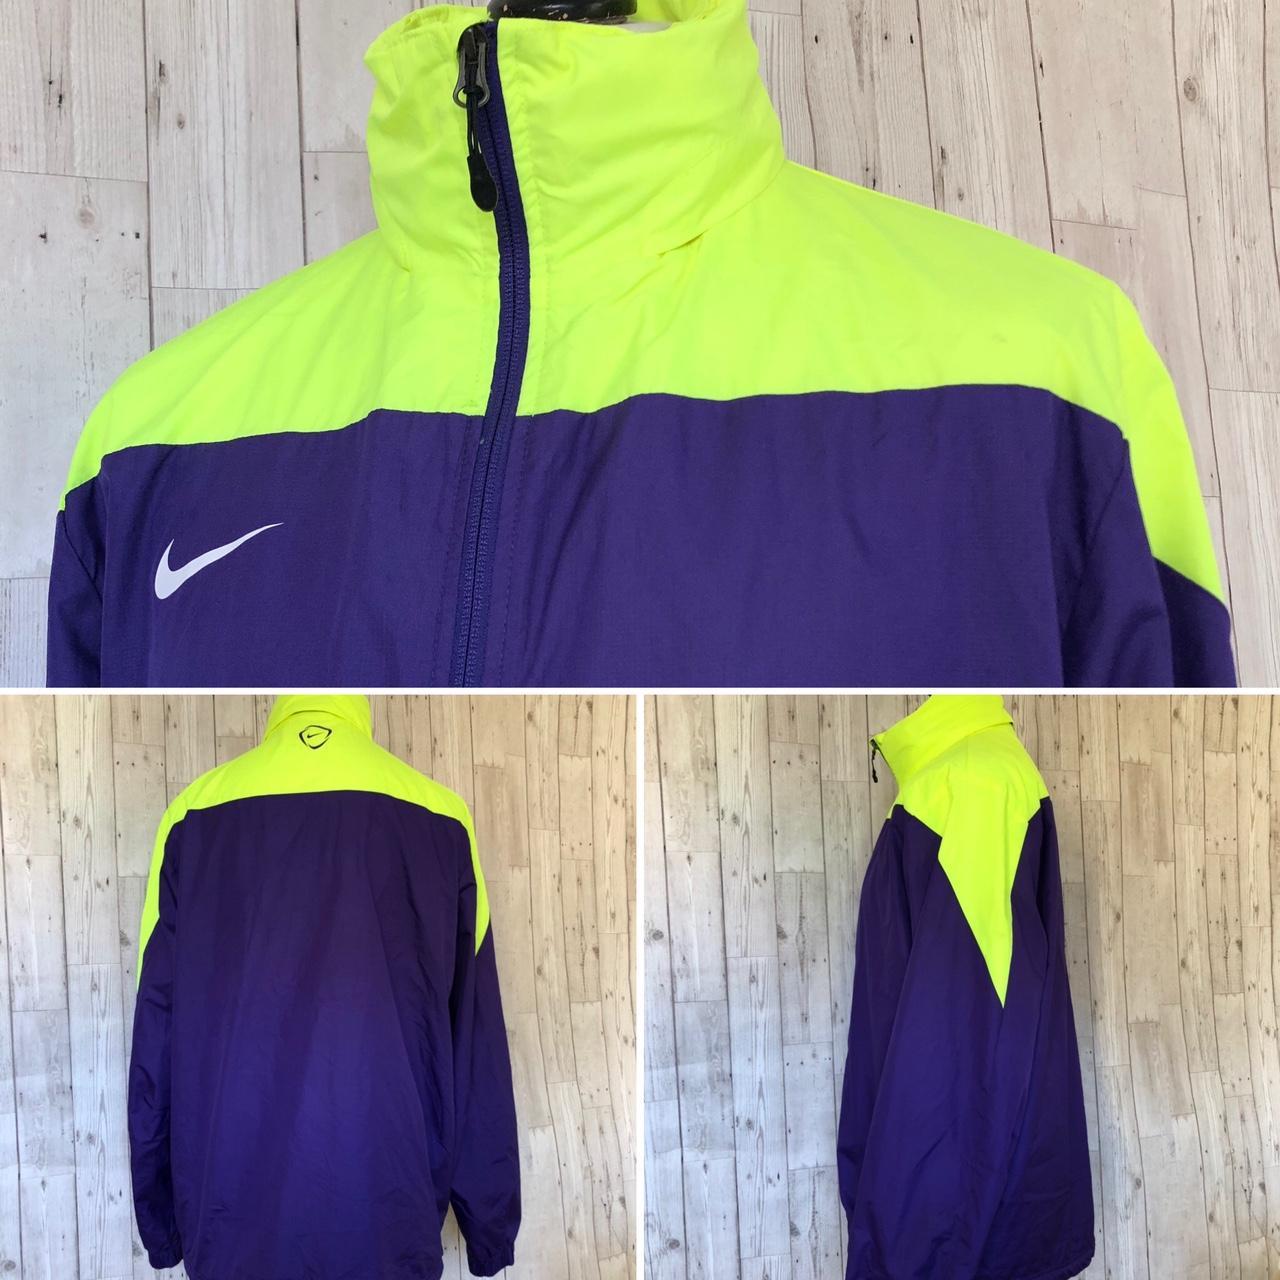 Nike Storm Fit Jacket Size Large Neon yellow /... - Depop